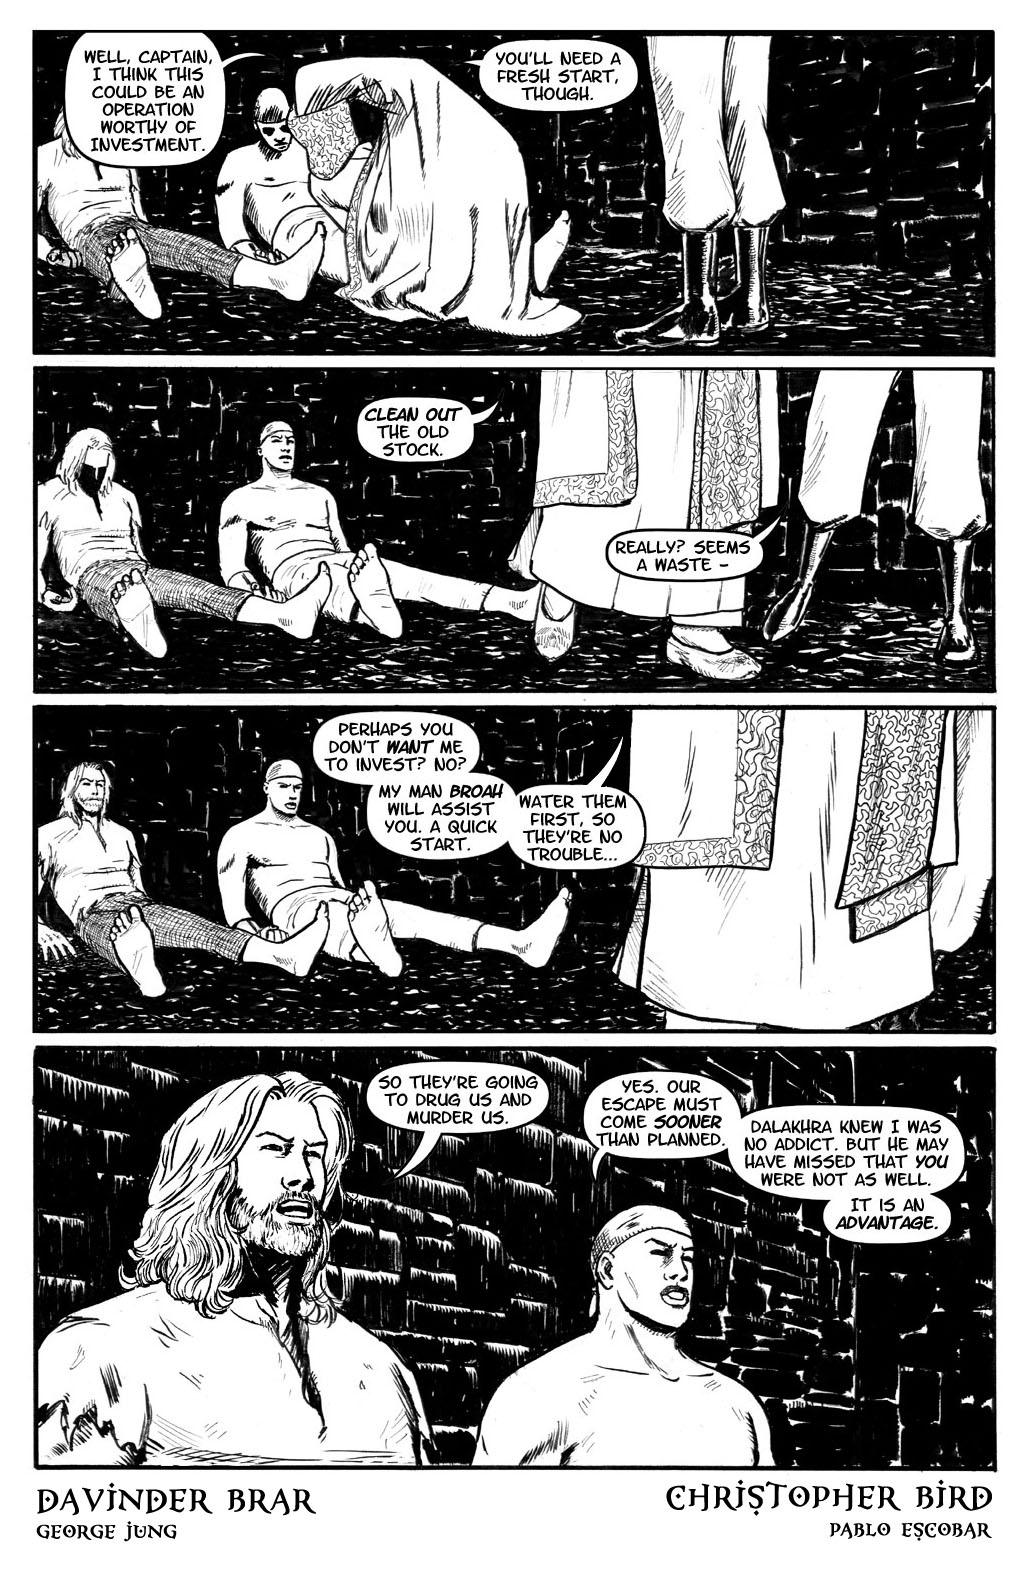 Book 2, page 13